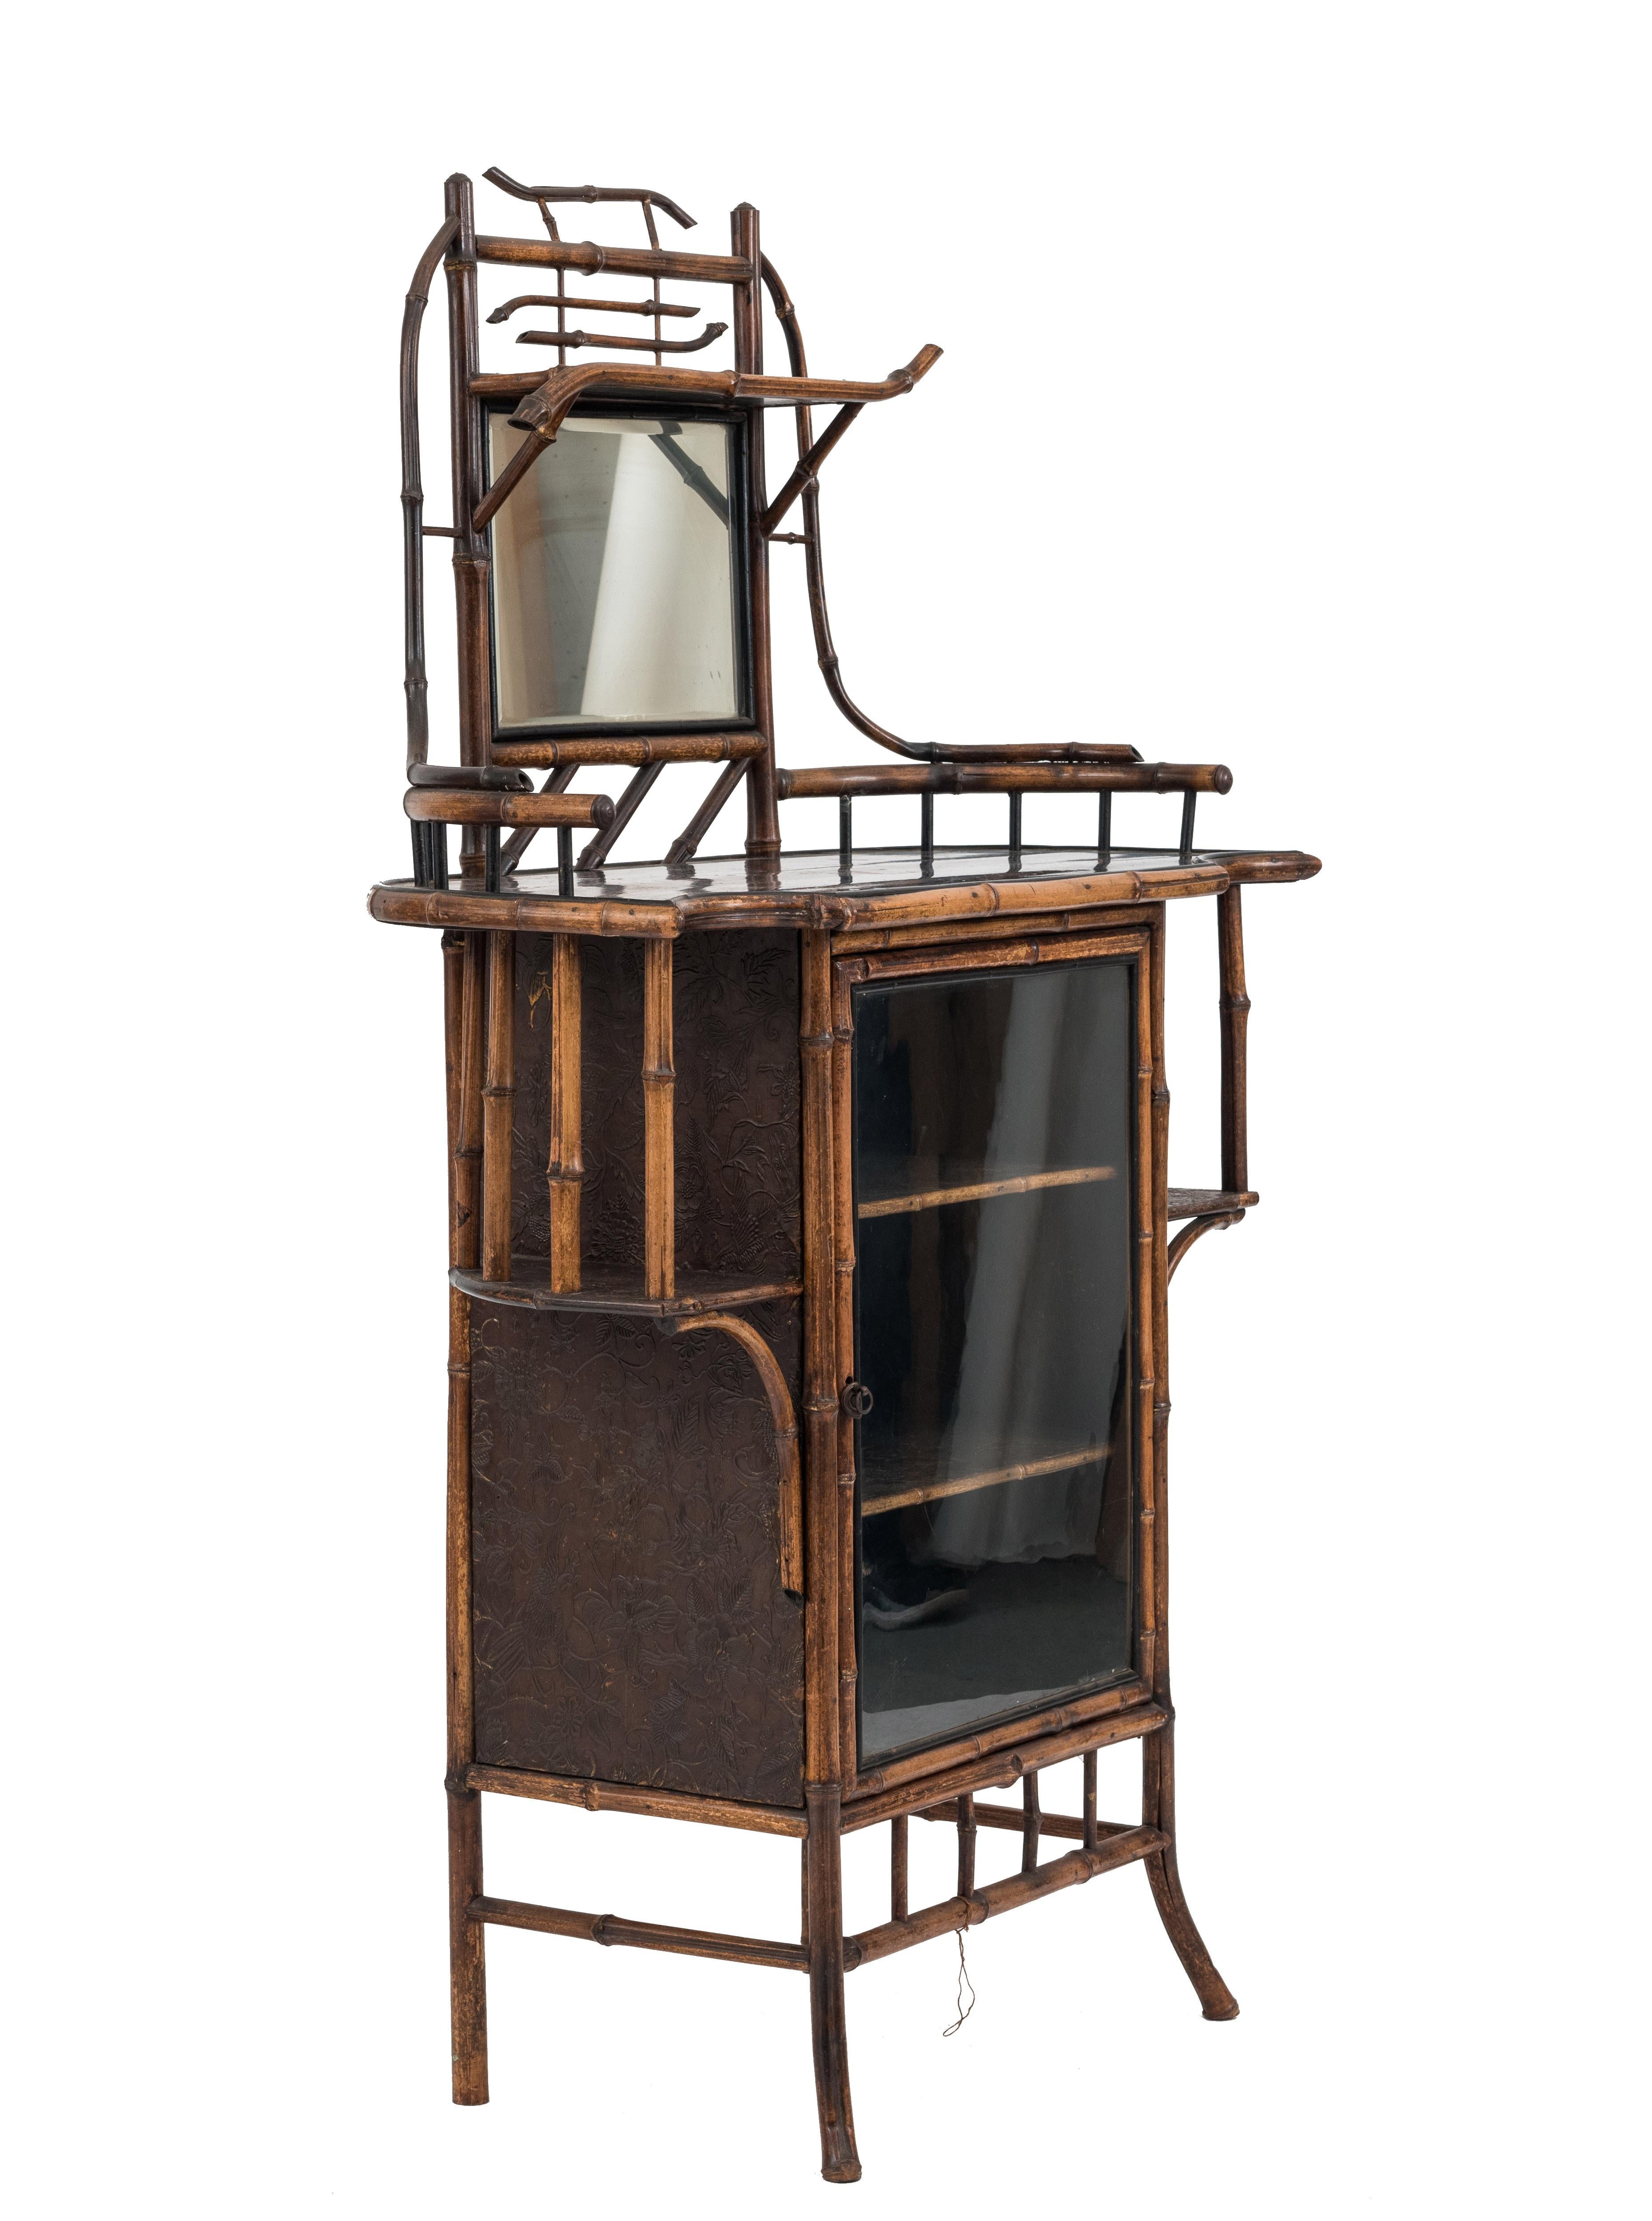 Late 19th-early 20th century bamboo étagère with side shelves, glass door, and mirrored upper section with shaped black lacquered decorated top.